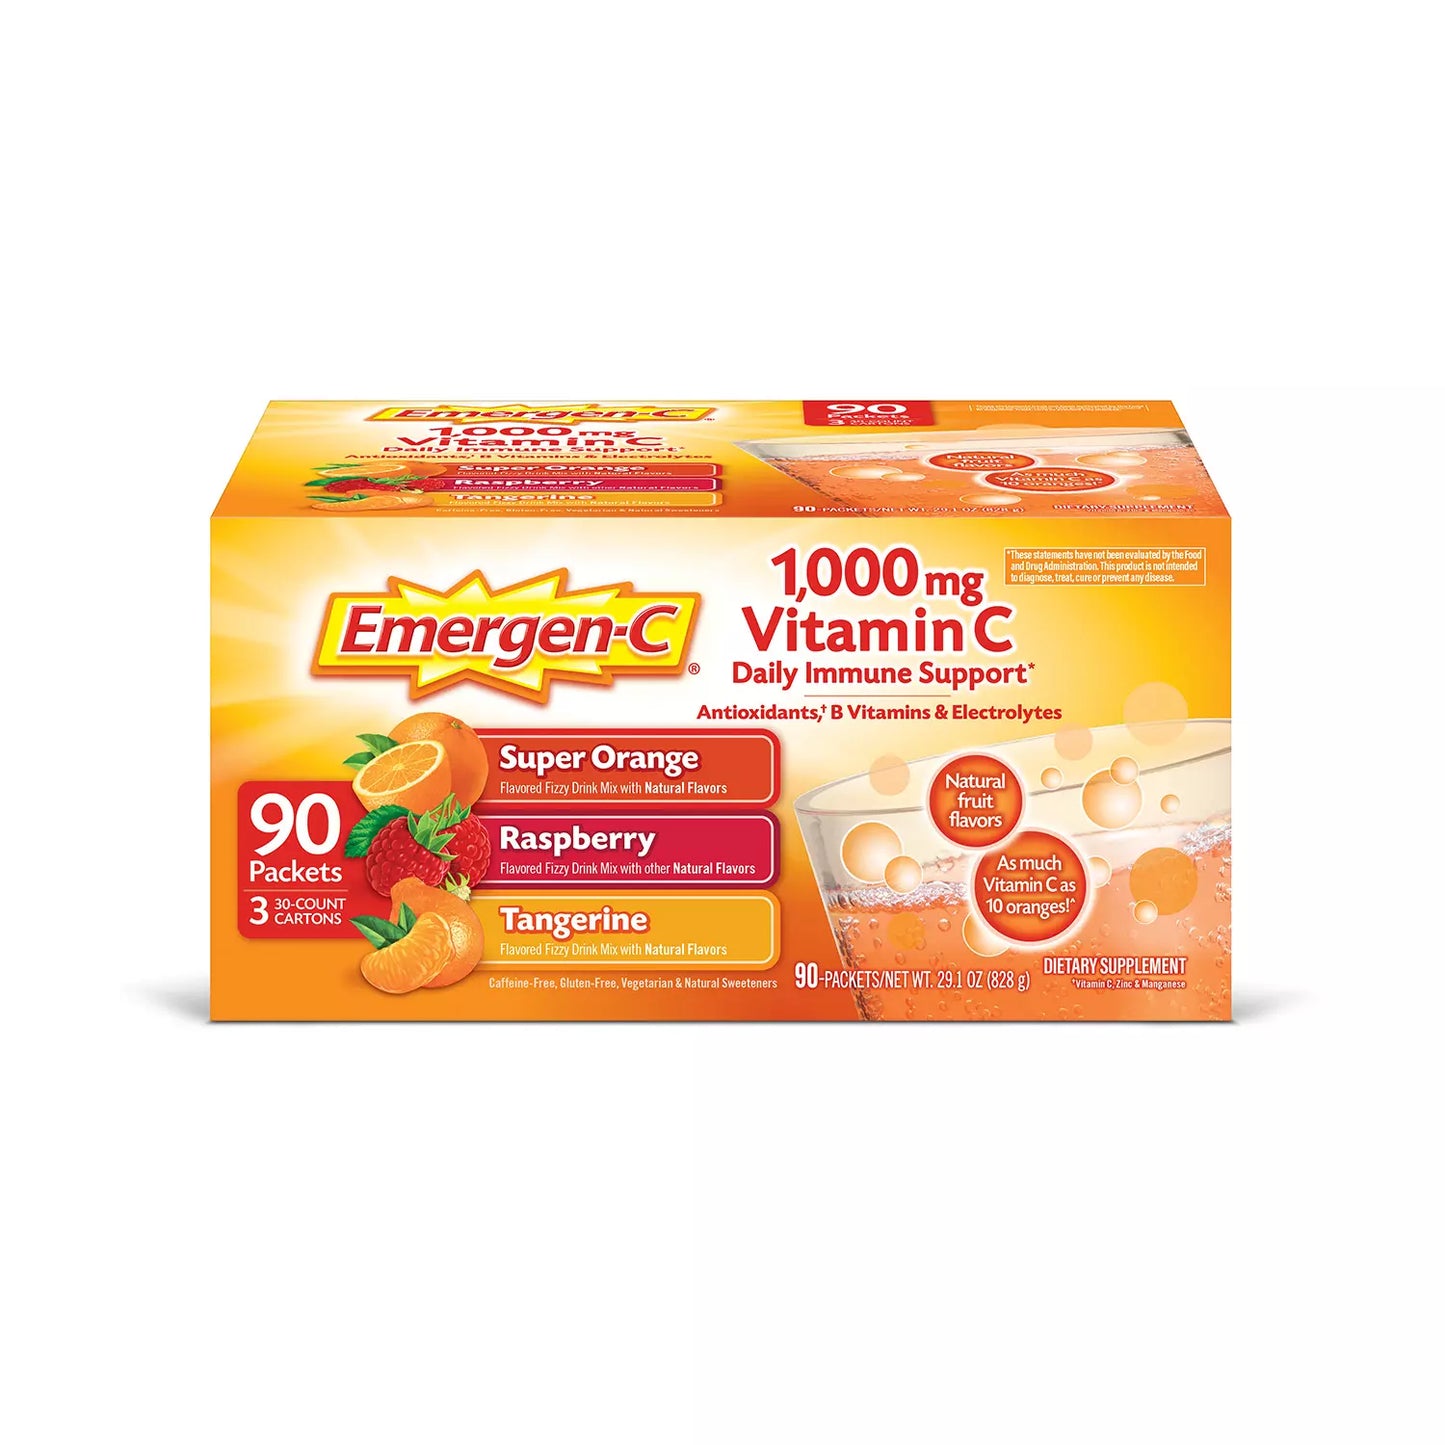 Emergen-C Dietary Supplement Drink Mix with 1000 mg Vitamin C 29.1oz  90 Count